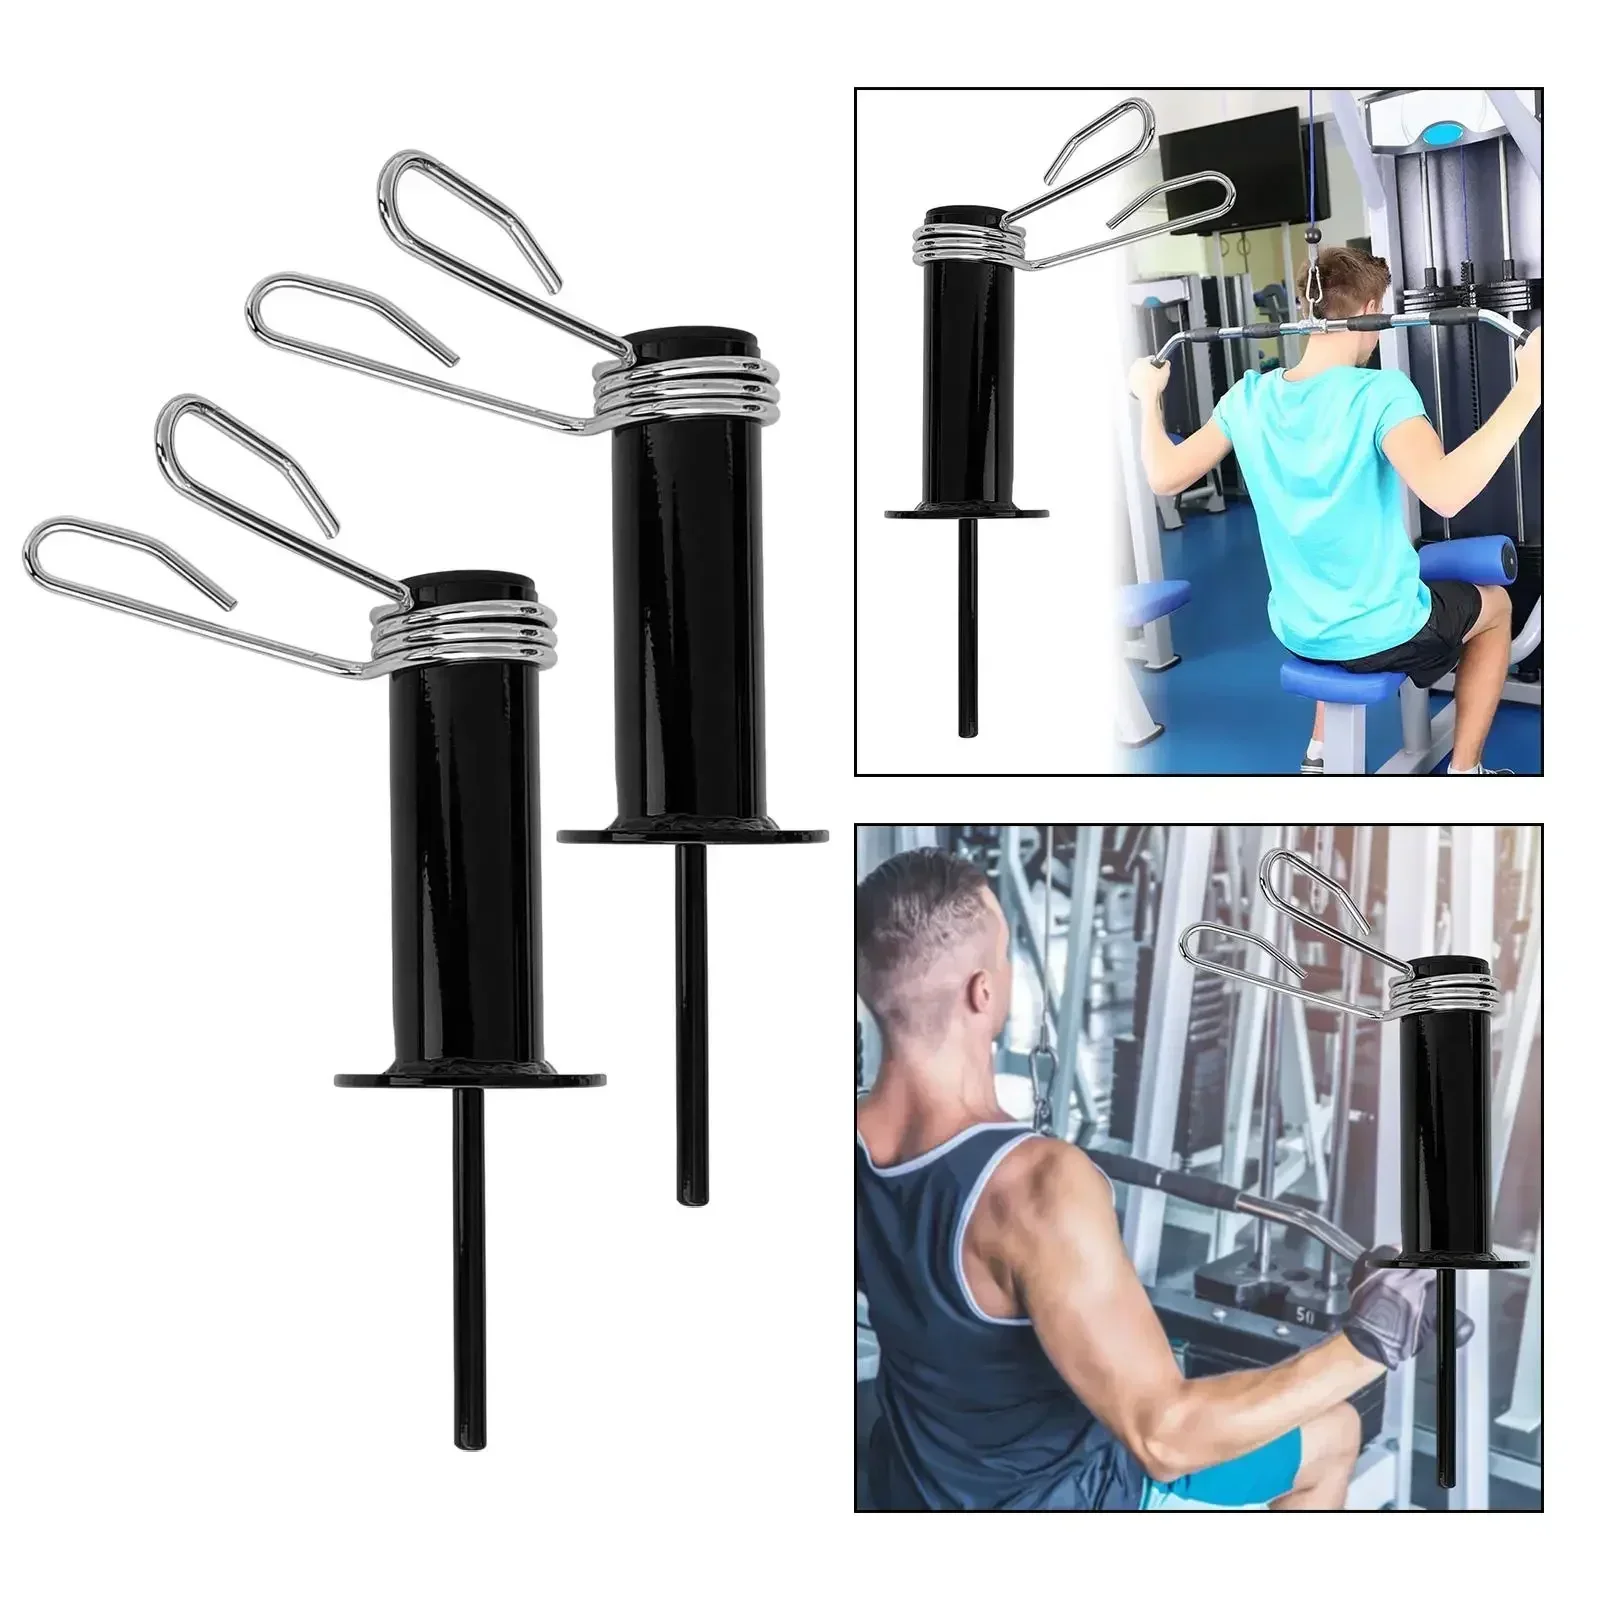 

Replacement Loading Extender Locking Parts Gym Stack Weight Training Portable Barbell Fitness Cable Strength for